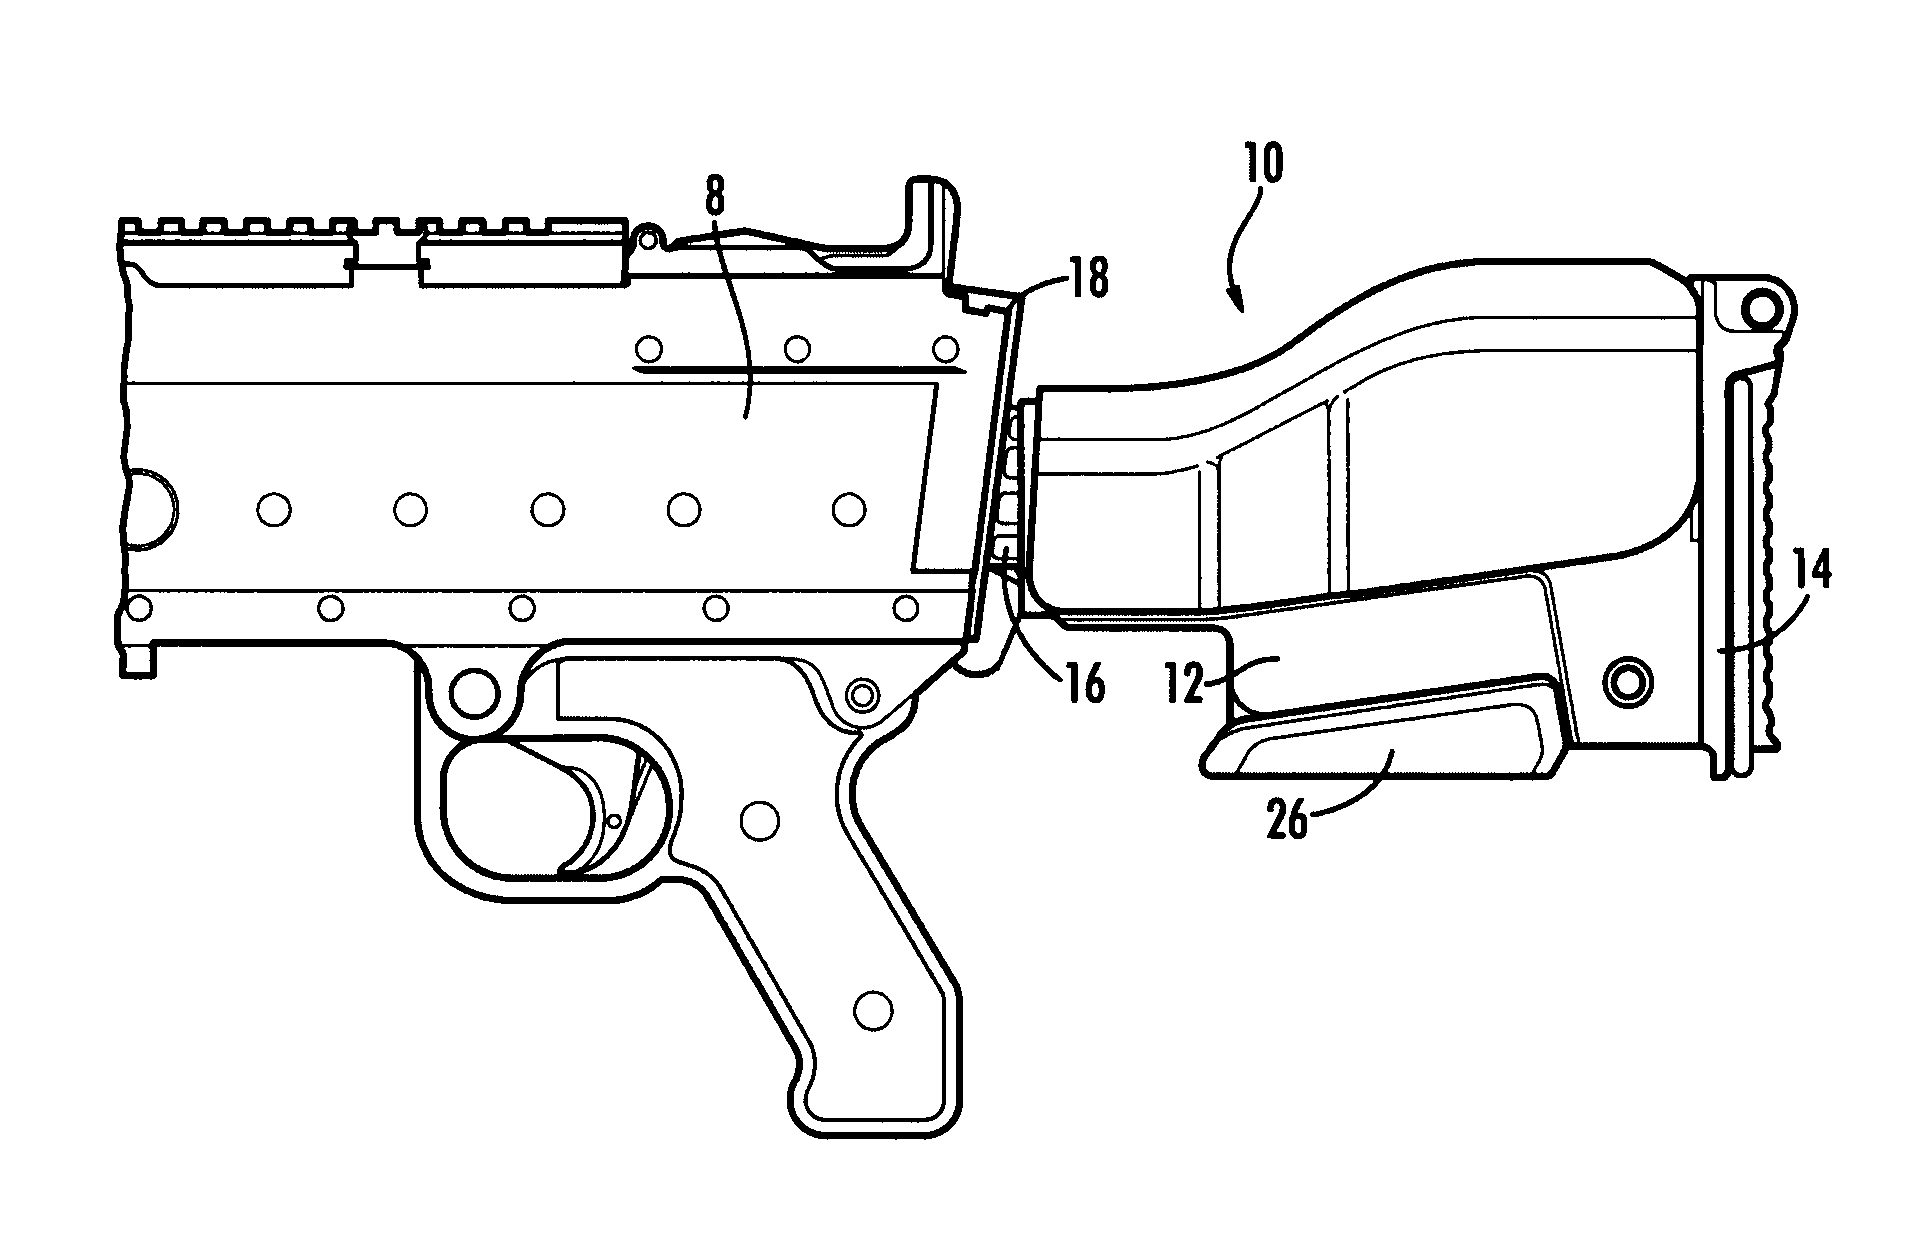 Adjustable butt stock assembly